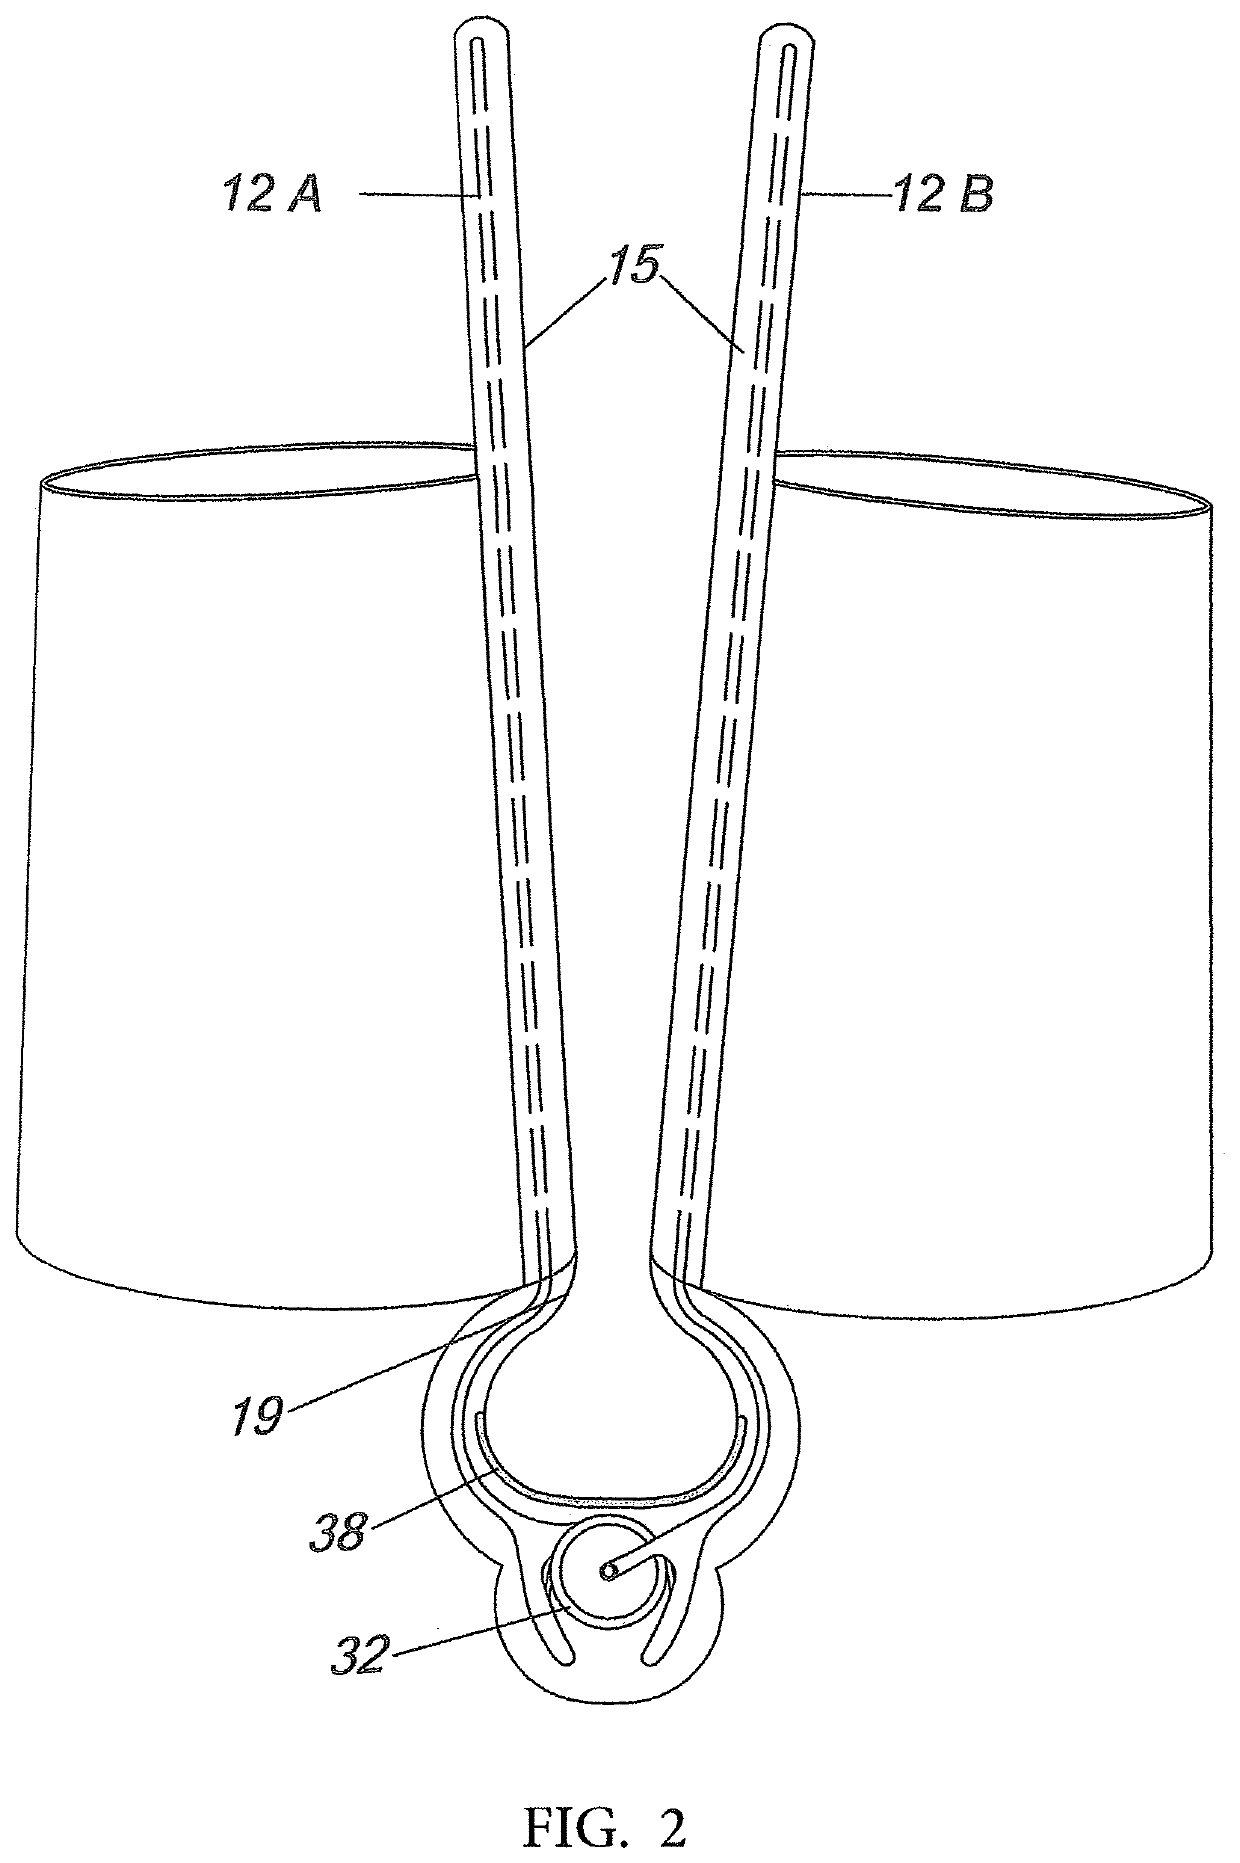 Nasal air flow maintenance and septal deviation correction device